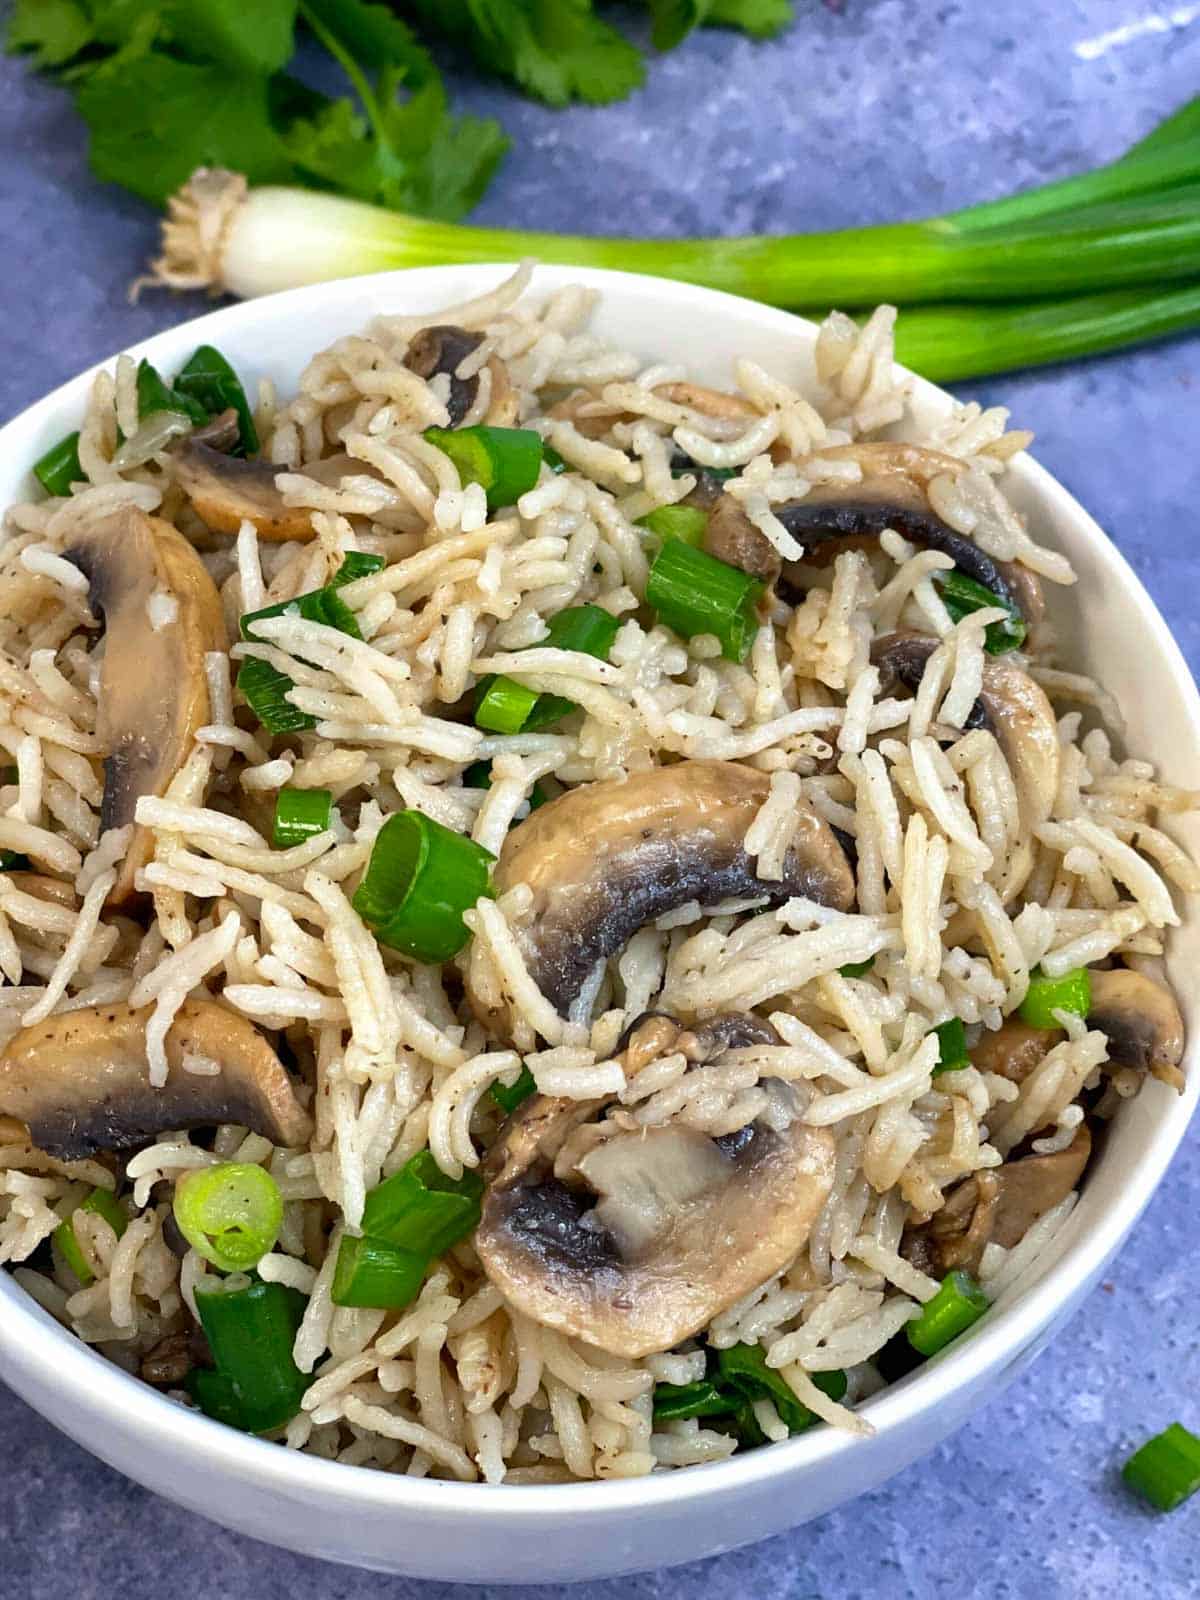 mushroom rice served in a bowl with green onions and cilantro on the side